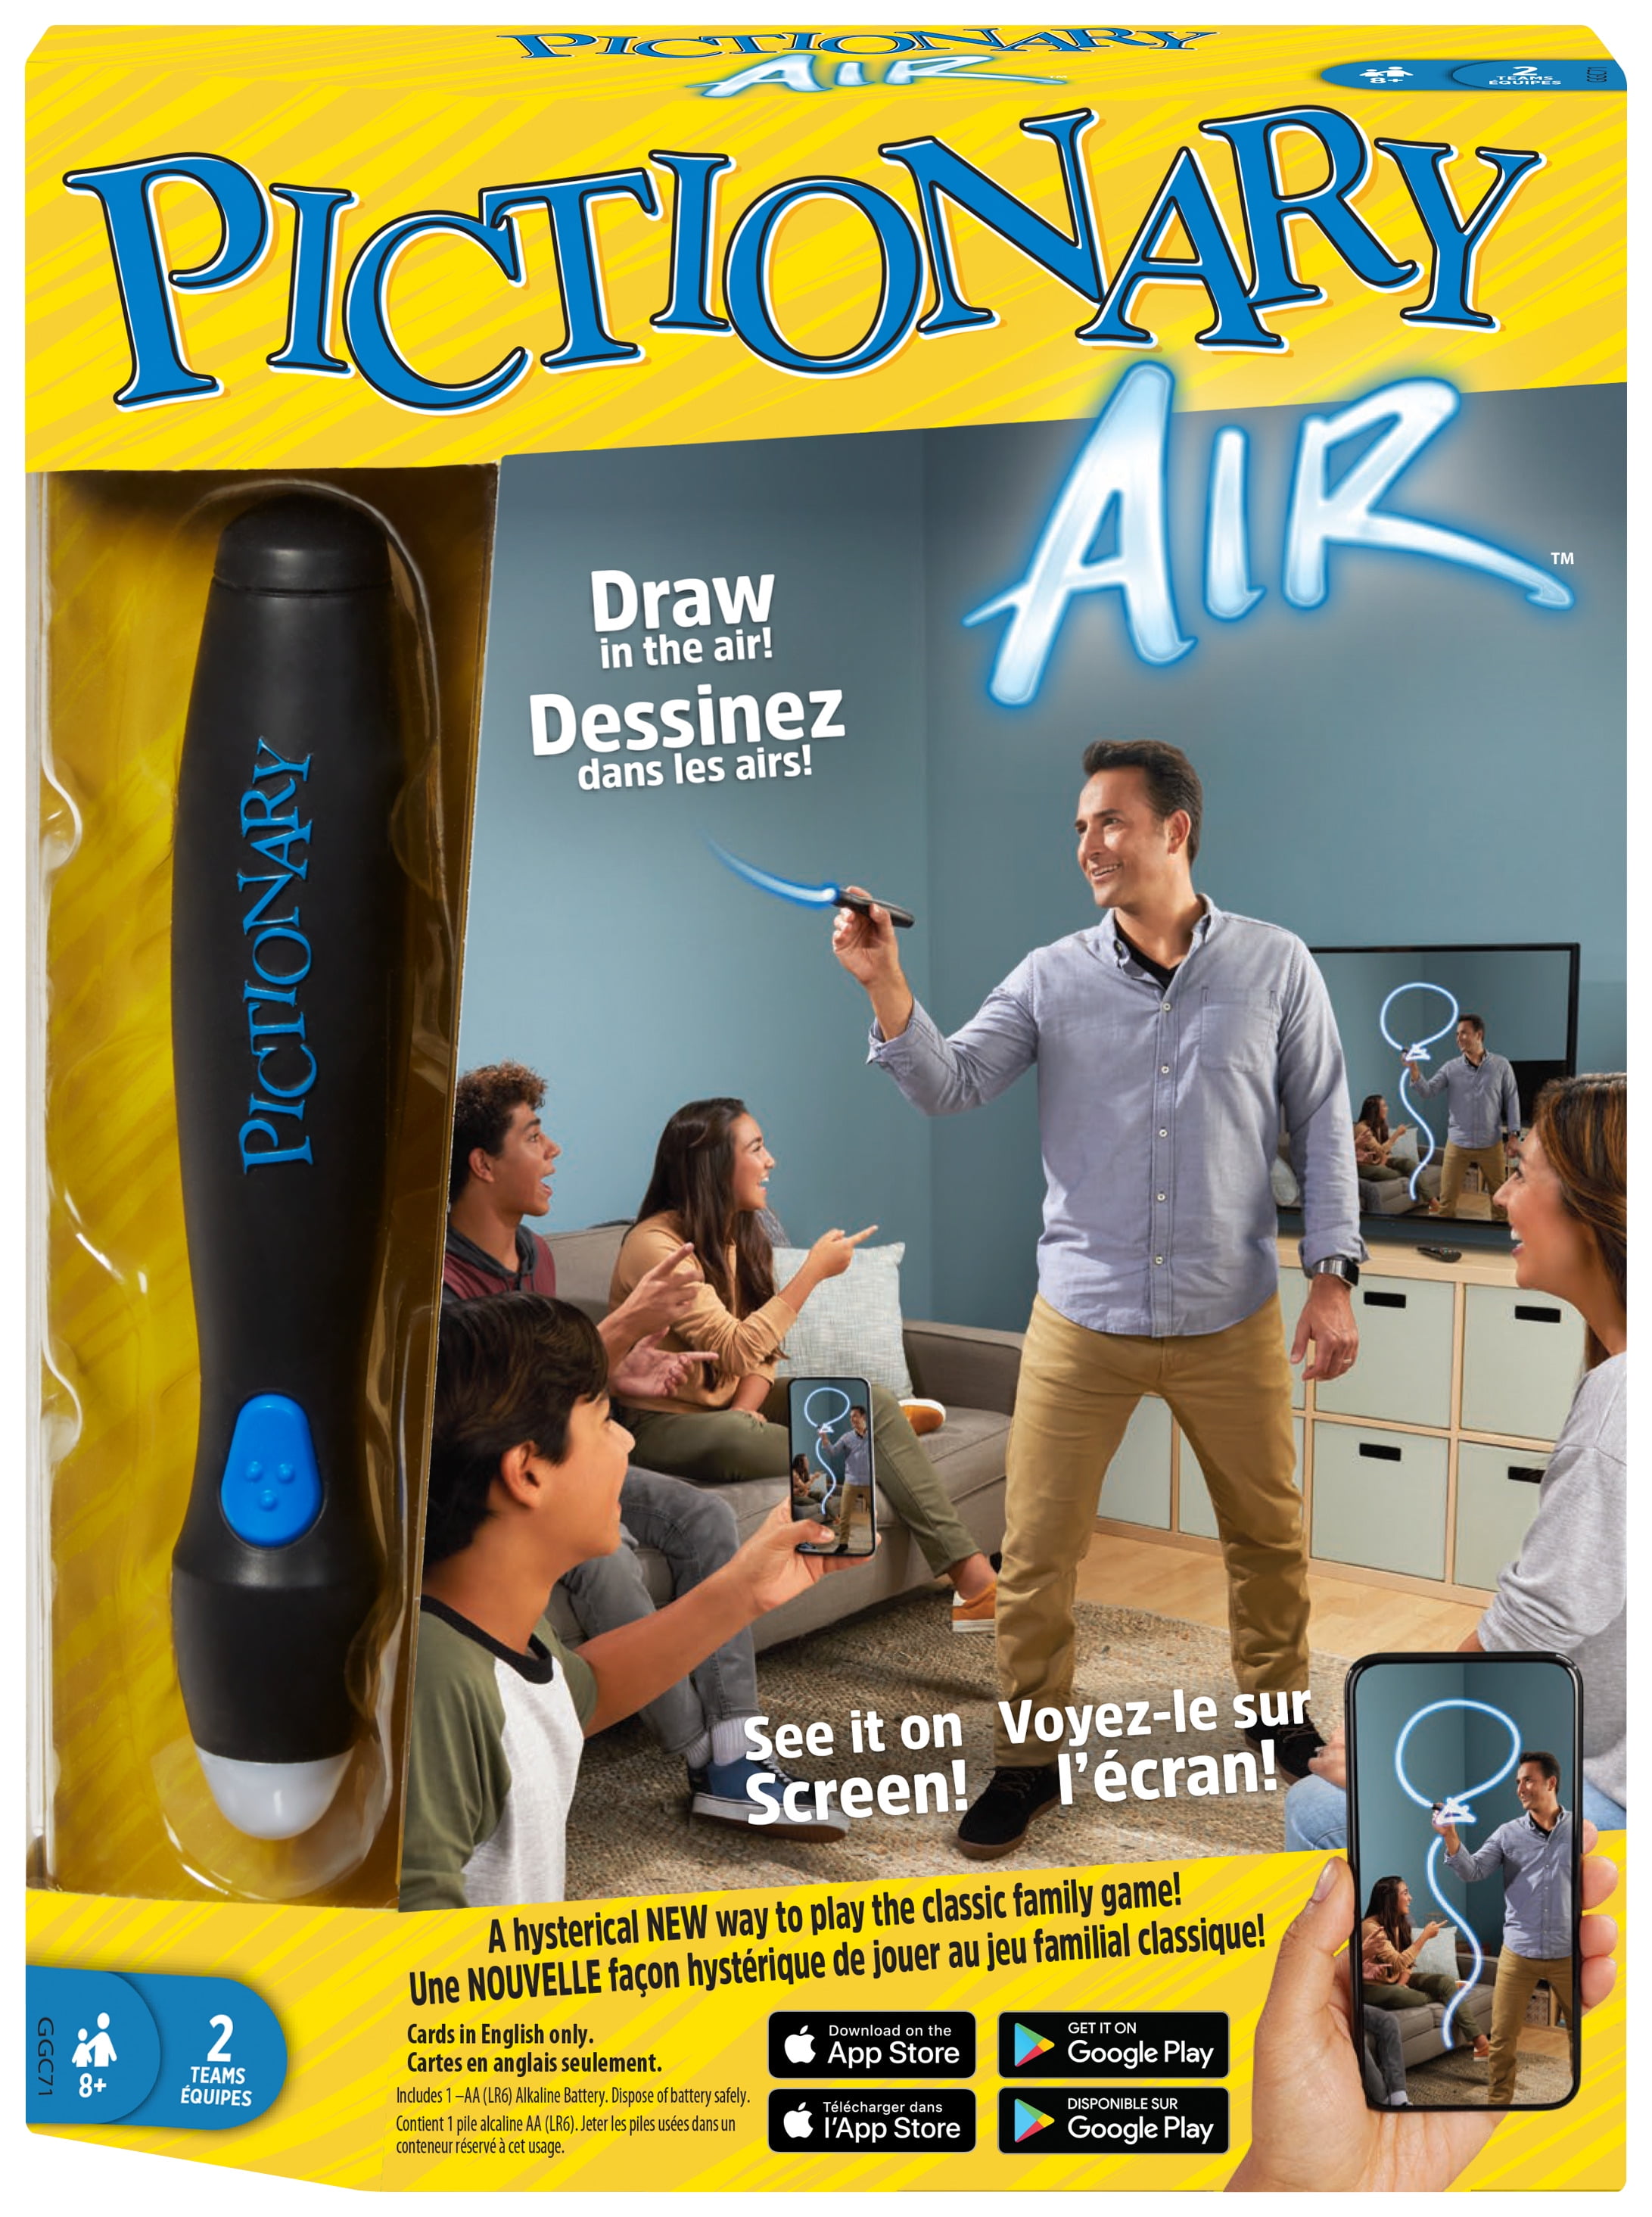 Mattel Games Pictionary Air 2 Game for Kids, Adults, Family and Game Night,  Award-Winning Air-Drawing Family Game, Draw in the Air and See it On